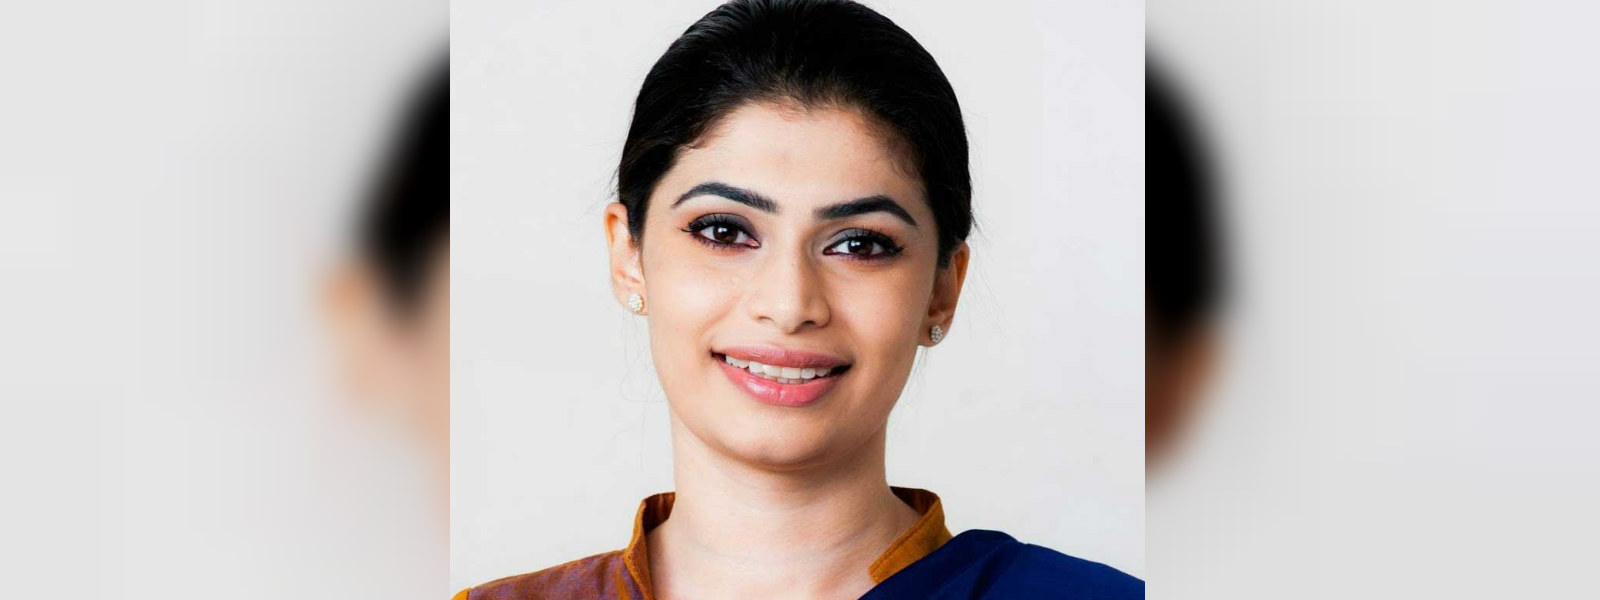 We should set aside our differences-Hirunika P.